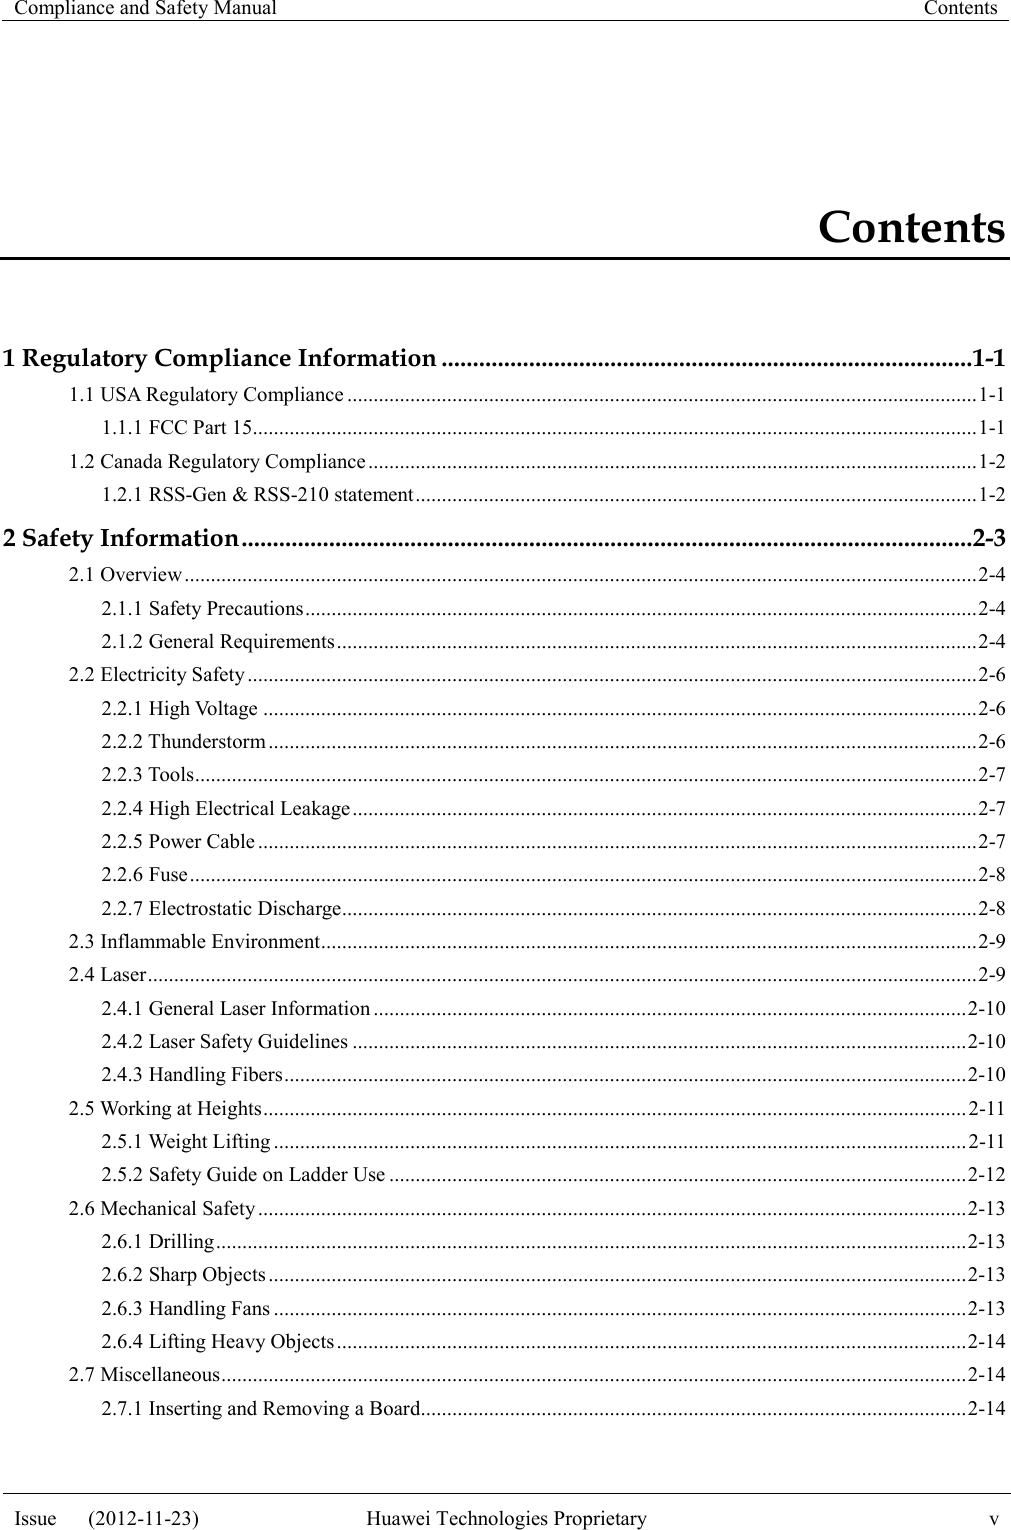 Compliance and Safety Manual Contents  Issue      (2012-11-23) Huawei Technologies Proprietary v  Contents 1 Regulatory Compliance Information ..................................................................................... 1-1 1.1 USA Regulatory Compliance ........................................................................................................................ 1-1 1.1.1 FCC Part 15.......................................................................................................................................... 1-1 1.2 Canada Regulatory Compliance .................................................................................................................... 1-2 1.2.1 RSS-Gen &amp; RSS-210 statement ........................................................................................................... 1-2 2 Safety Information ..................................................................................................................... 2-3 2.1 Overview ....................................................................................................................................................... 2-4 2.1.1 Safety Precautions ................................................................................................................................ 2-4 2.1.2 General Requirements .......................................................................................................................... 2-4 2.2 Electricity Safety ........................................................................................................................................... 2-6 2.2.1 High Voltage ........................................................................................................................................ 2-6 2.2.2 Thunderstorm ....................................................................................................................................... 2-6 2.2.3 Tools ..................................................................................................................................................... 2-7 2.2.4 High Electrical Leakage ....................................................................................................................... 2-7 2.2.5 Power Cable ......................................................................................................................................... 2-7 2.2.6 Fuse ...................................................................................................................................................... 2-8 2.2.7 Electrostatic Discharge......................................................................................................................... 2-8 2.3 Inflammable Environment ............................................................................................................................. 2-9 2.4 Laser .............................................................................................................................................................. 2-9 2.4.1 General Laser Information ................................................................................................................. 2-10 2.4.2 Laser Safety Guidelines ..................................................................................................................... 2-10 2.4.3 Handling Fibers .................................................................................................................................. 2-10 2.5 Working at Heights ...................................................................................................................................... 2-11 2.5.1 Weight Lifting .................................................................................................................................... 2-11 2.5.2 Safety Guide on Ladder Use .............................................................................................................. 2-12 2.6 Mechanical Safety ....................................................................................................................................... 2-13 2.6.1 Drilling ............................................................................................................................................... 2-13 2.6.2 Sharp Objects ..................................................................................................................................... 2-13 2.6.3 Handling Fans .................................................................................................................................... 2-13 2.6.4 Lifting Heavy Objects ........................................................................................................................ 2-14 2.7 Miscellaneous .............................................................................................................................................. 2-14 2.7.1 Inserting and Removing a Board ........................................................................................................ 2-14 